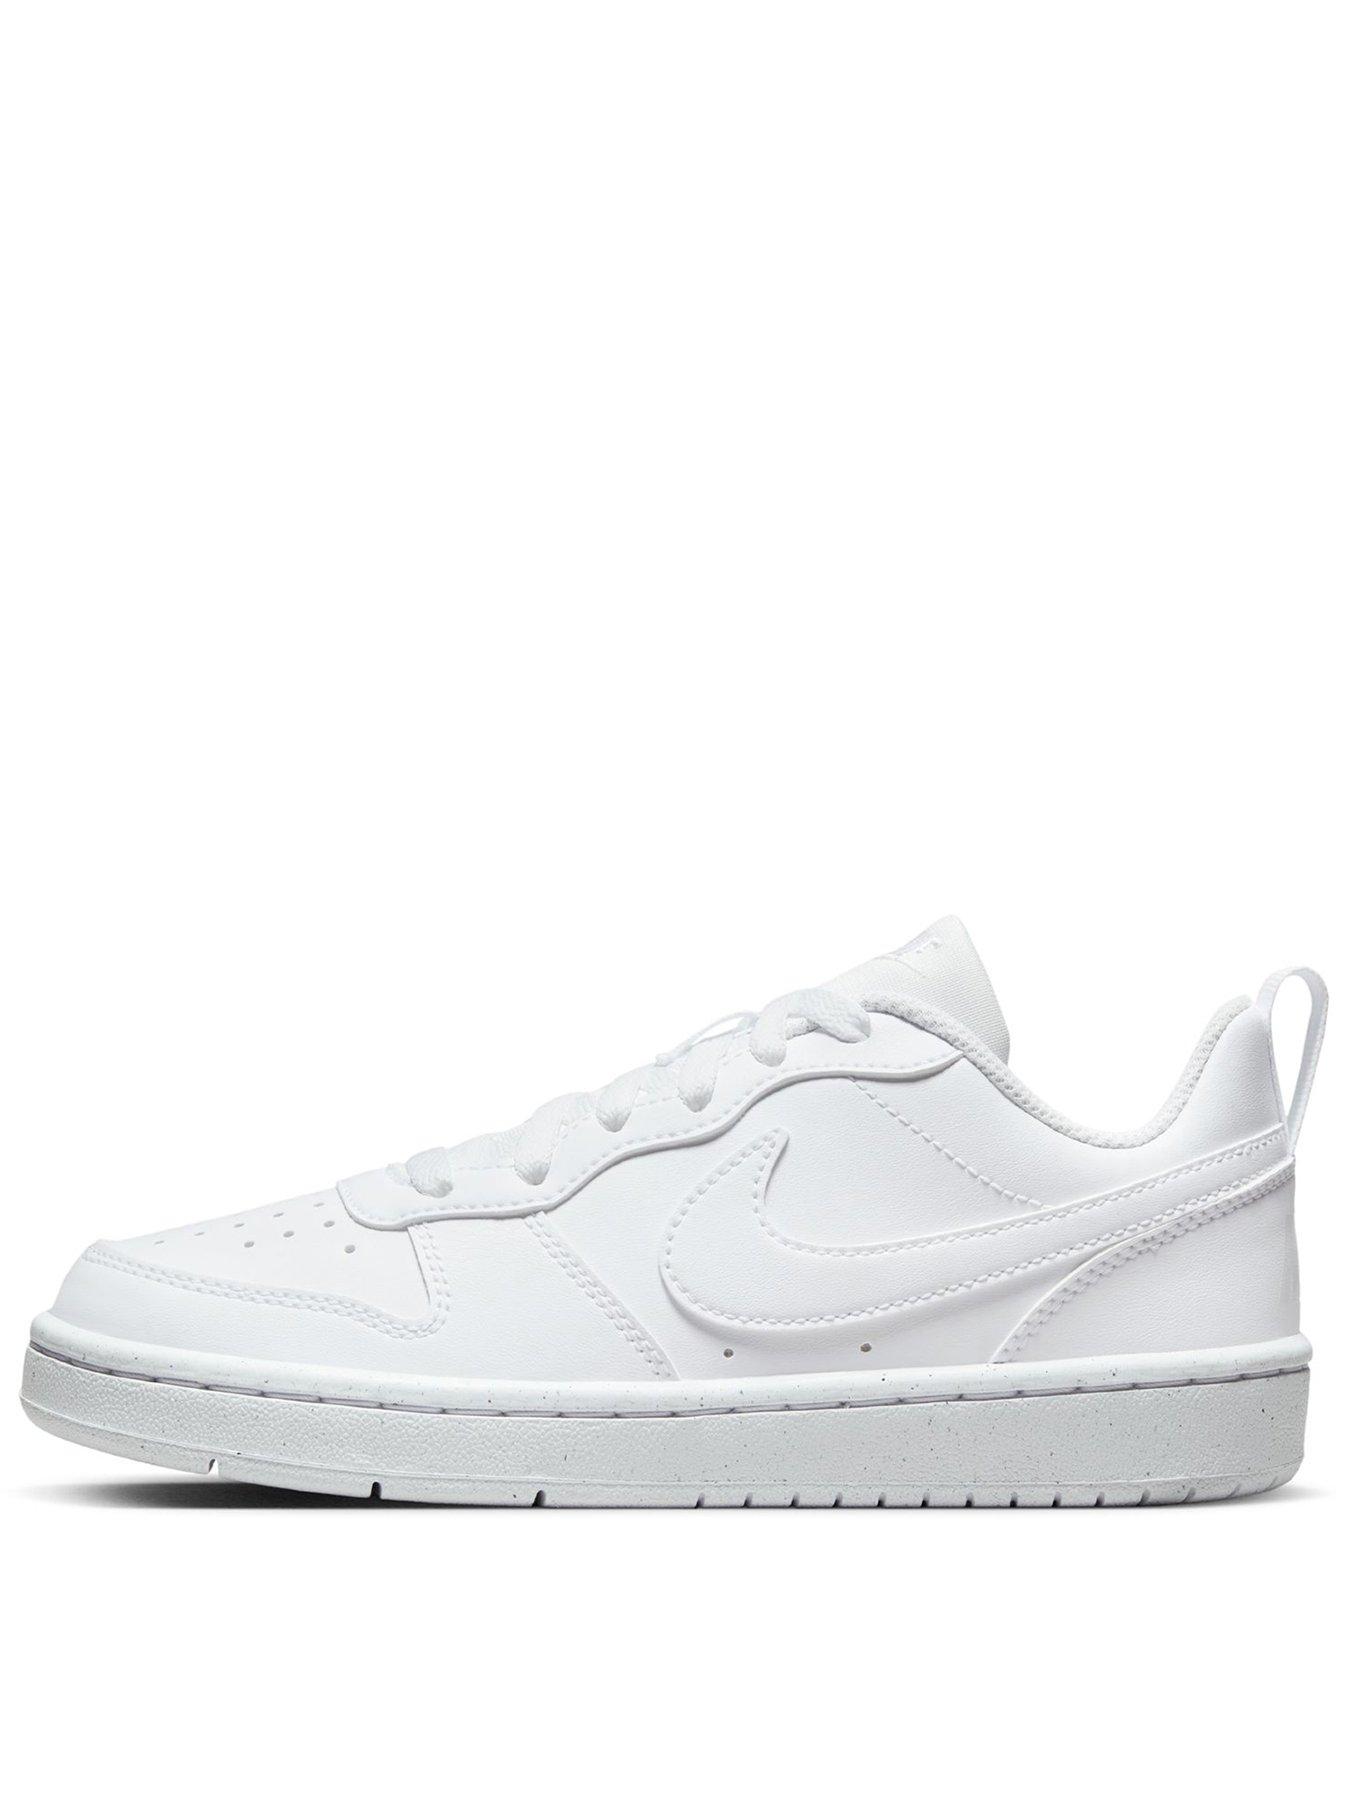 Nike Older Boys Court Borough Low Recraft Trainers | very.co.uk